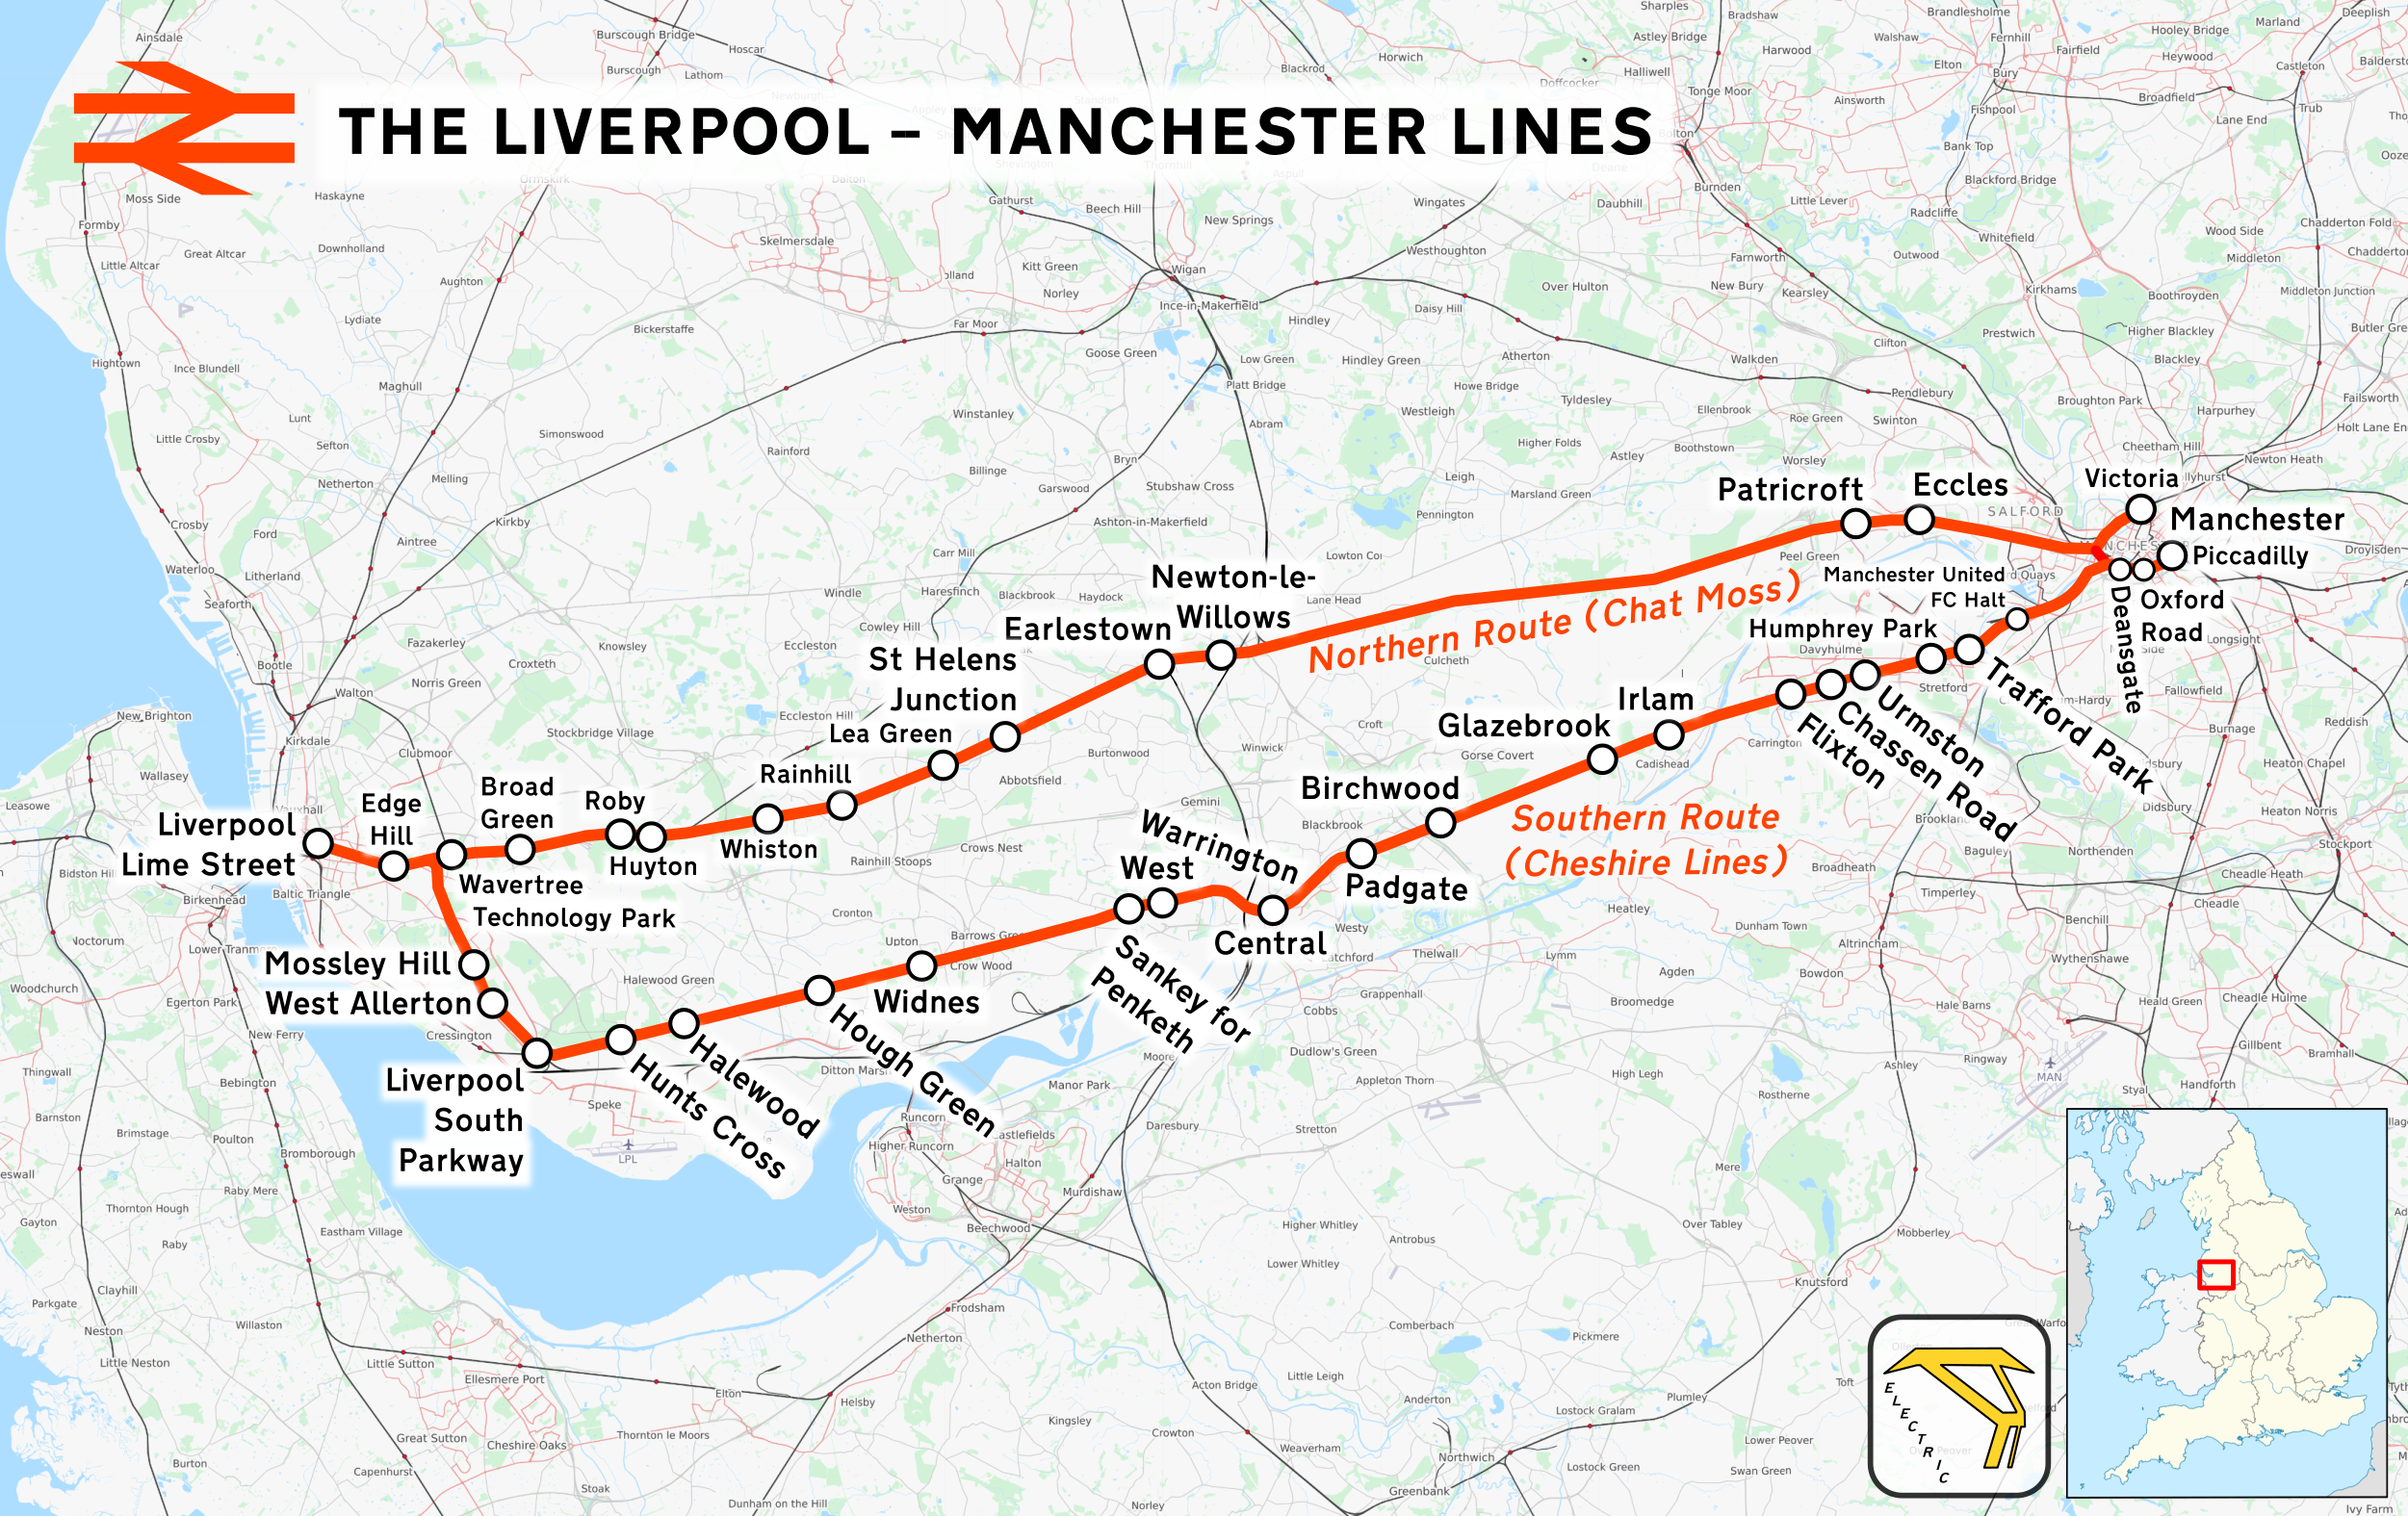 Liverpool-Manchester lines